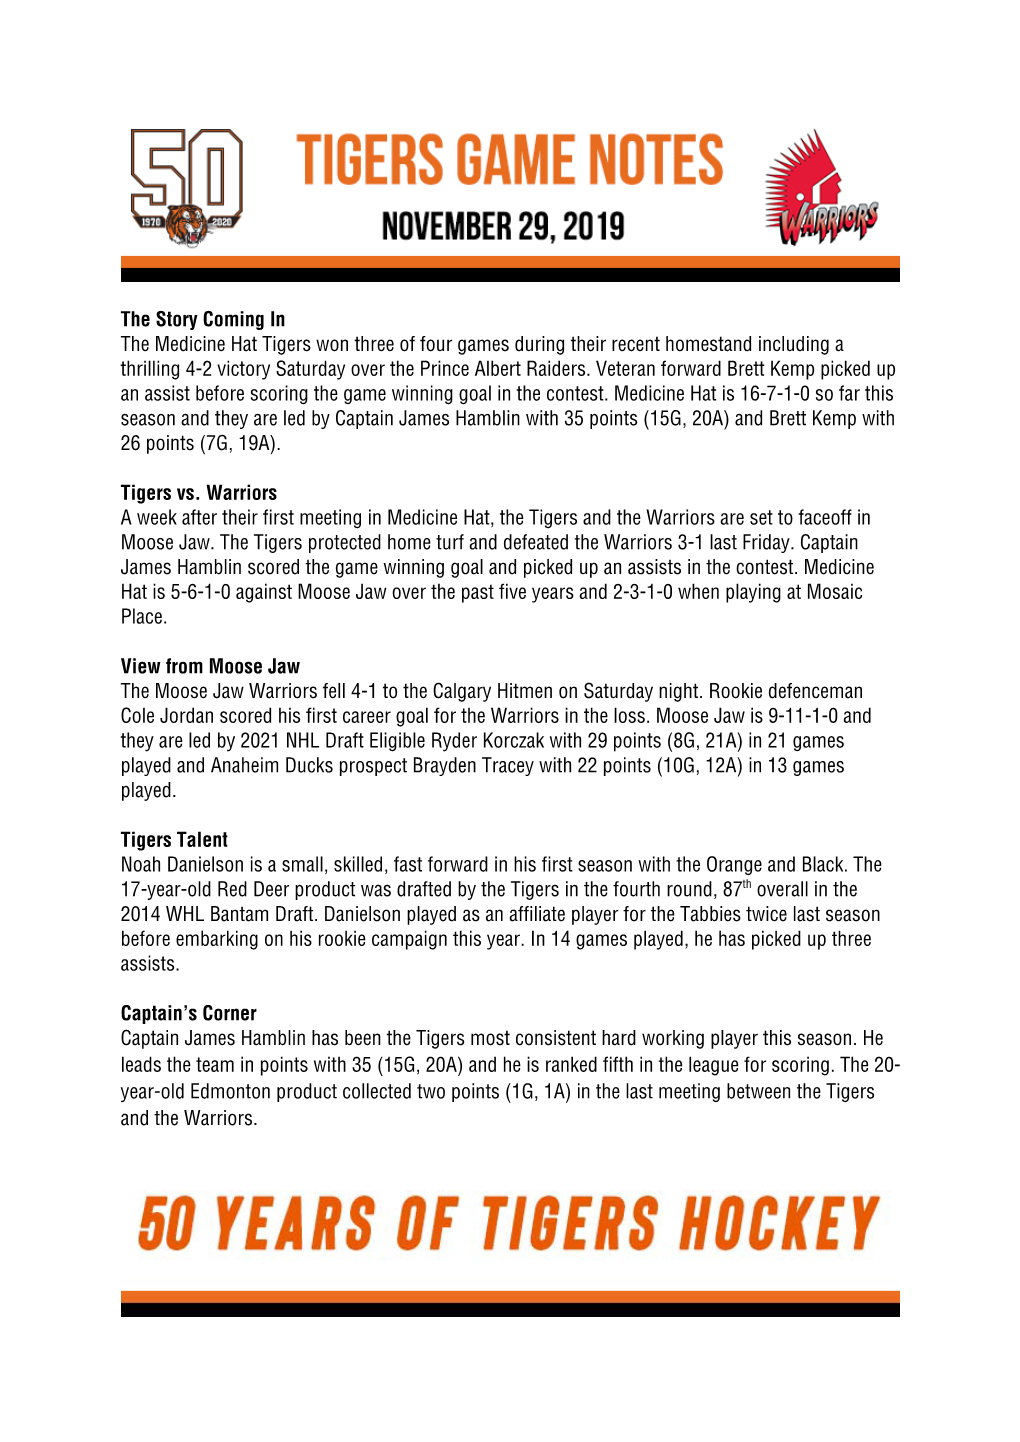 The Story Coming in the Medicine Hat Tigers Won Three of Four Games